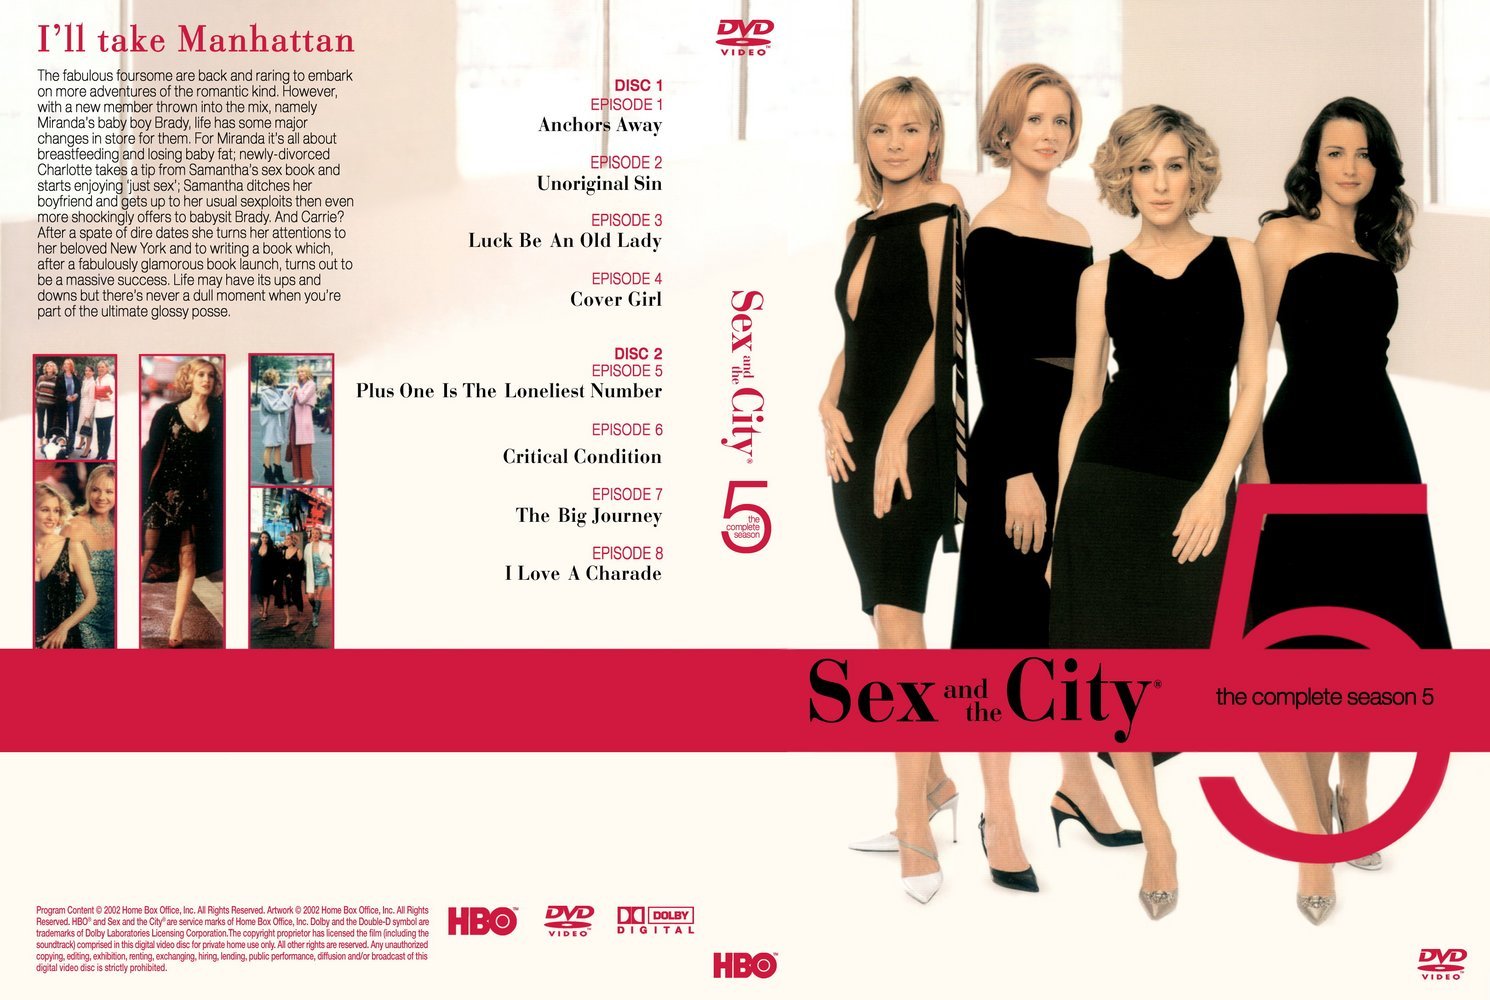 Jaquette DVD Sex and the city Saison 5 Zone 1